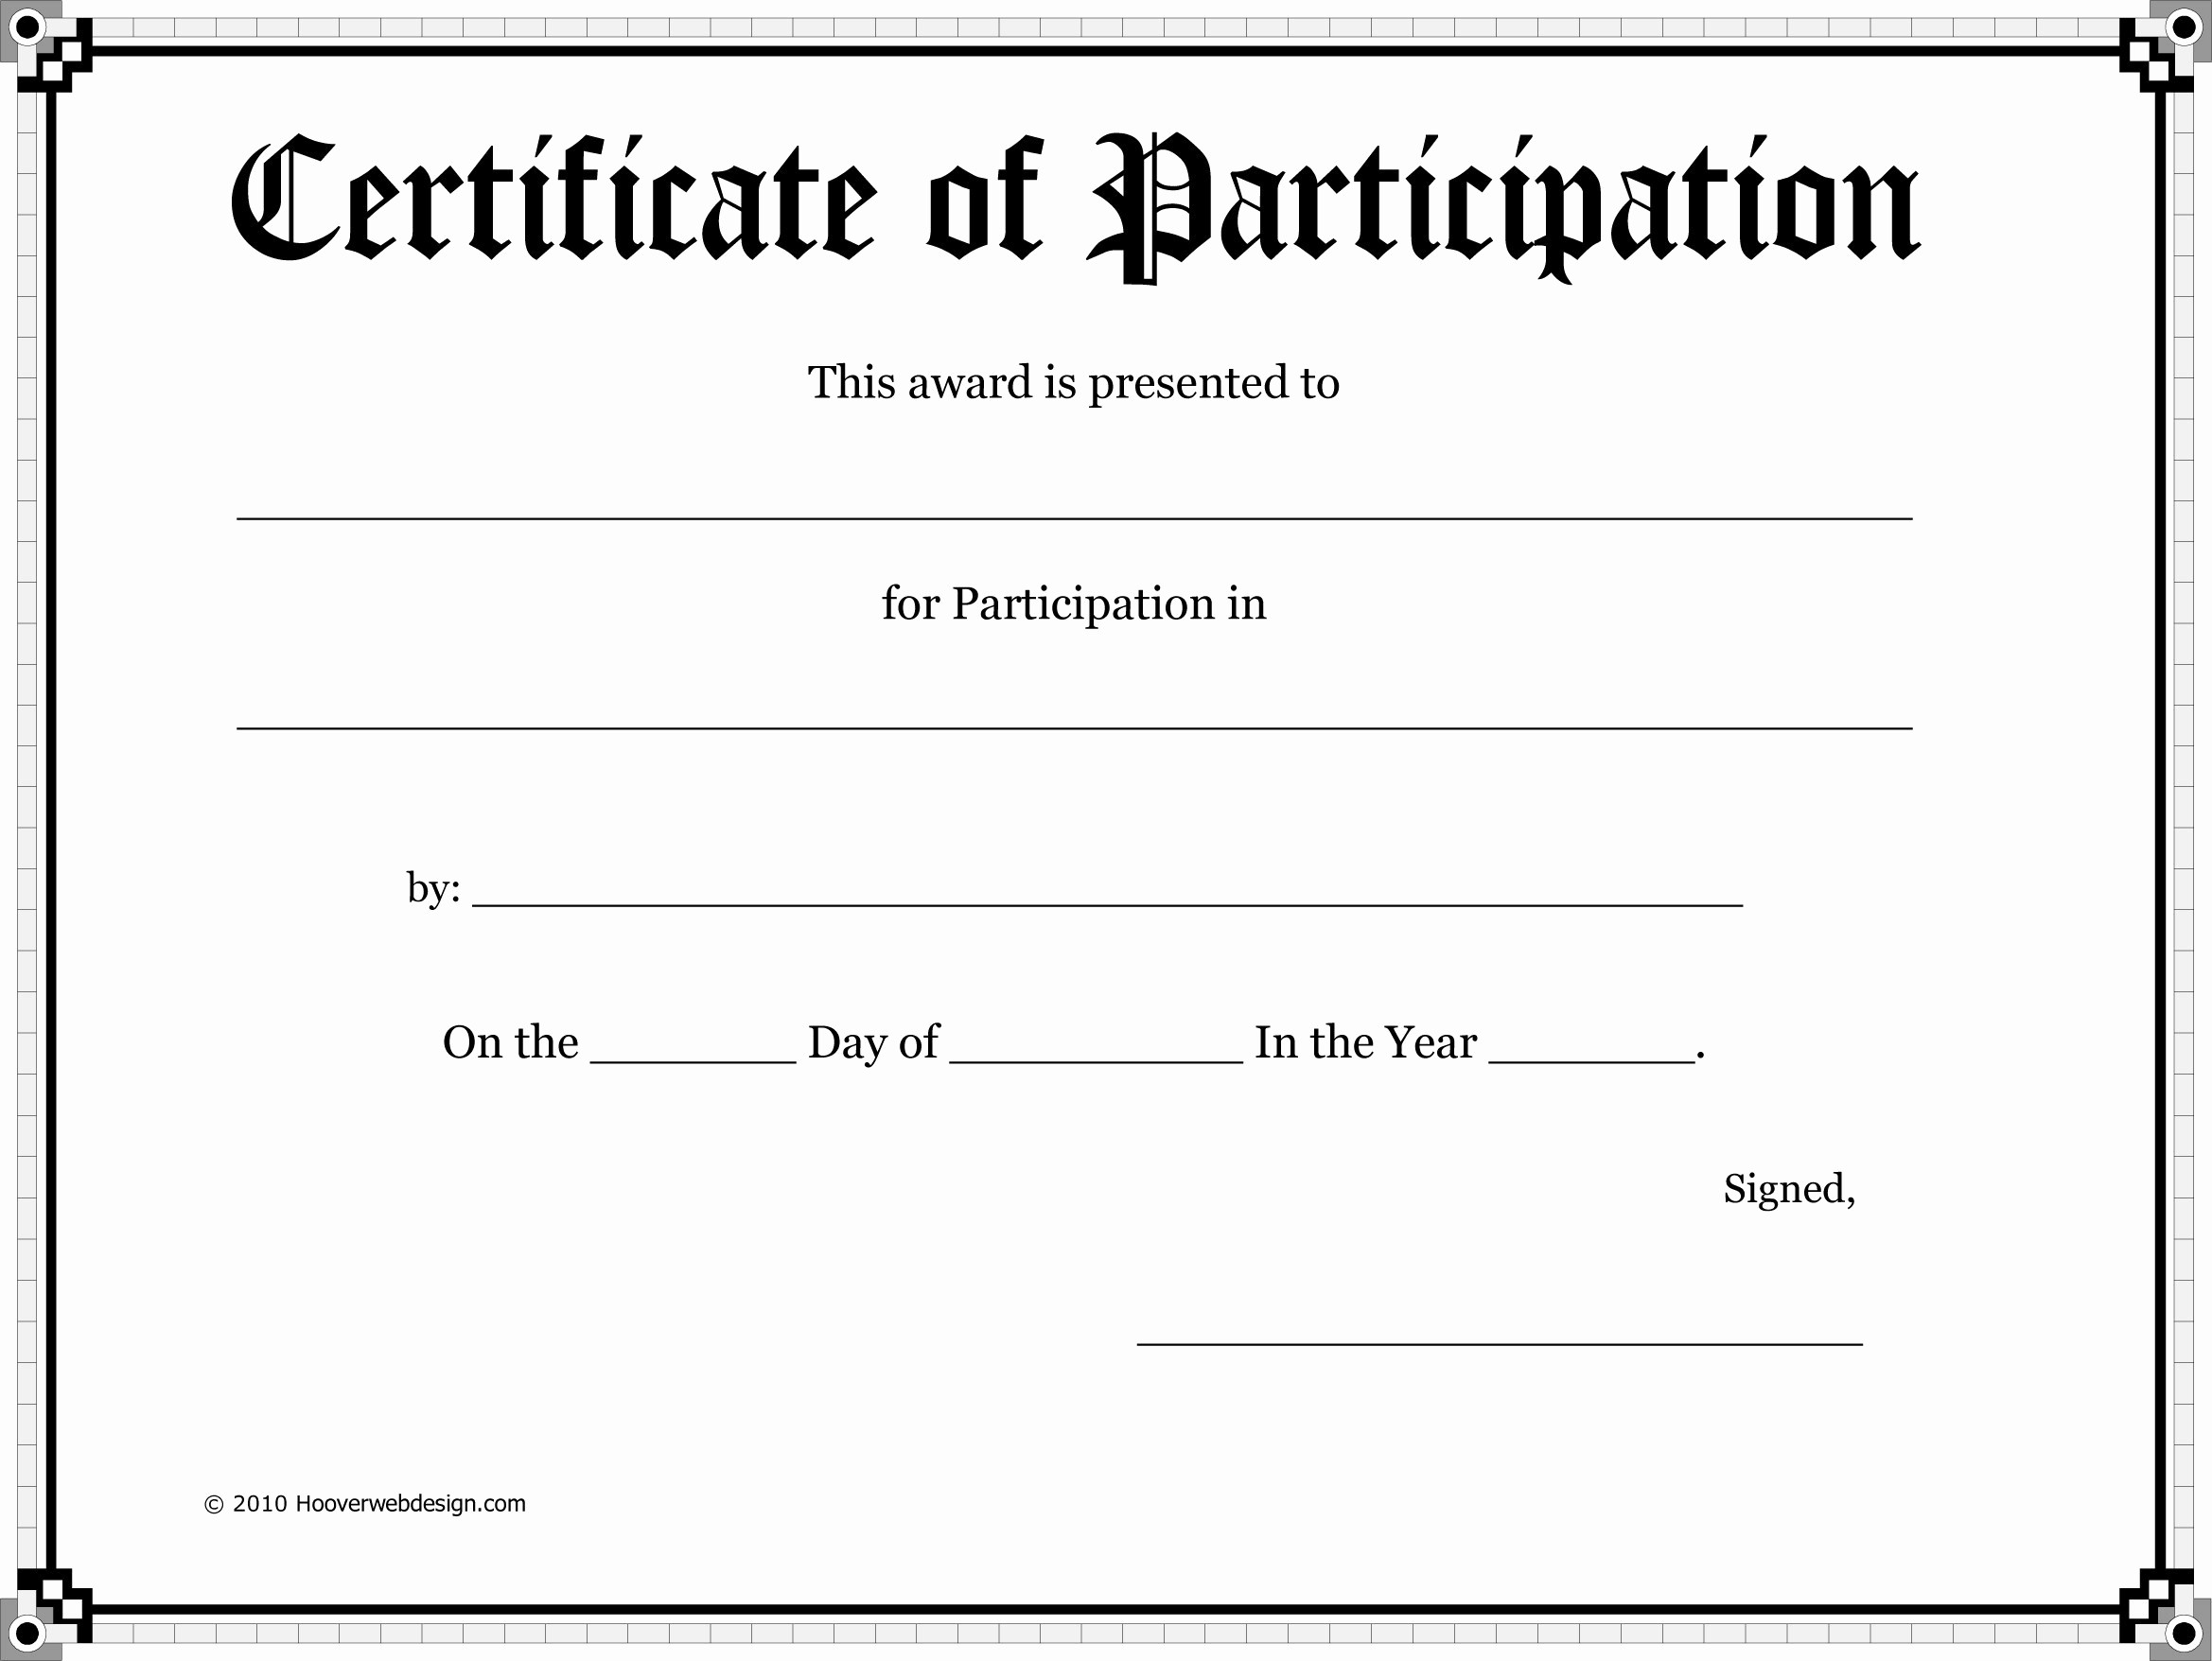 Certificate Of Participation Wording Samples Awesome Certificate Participation Sample Content Fresh